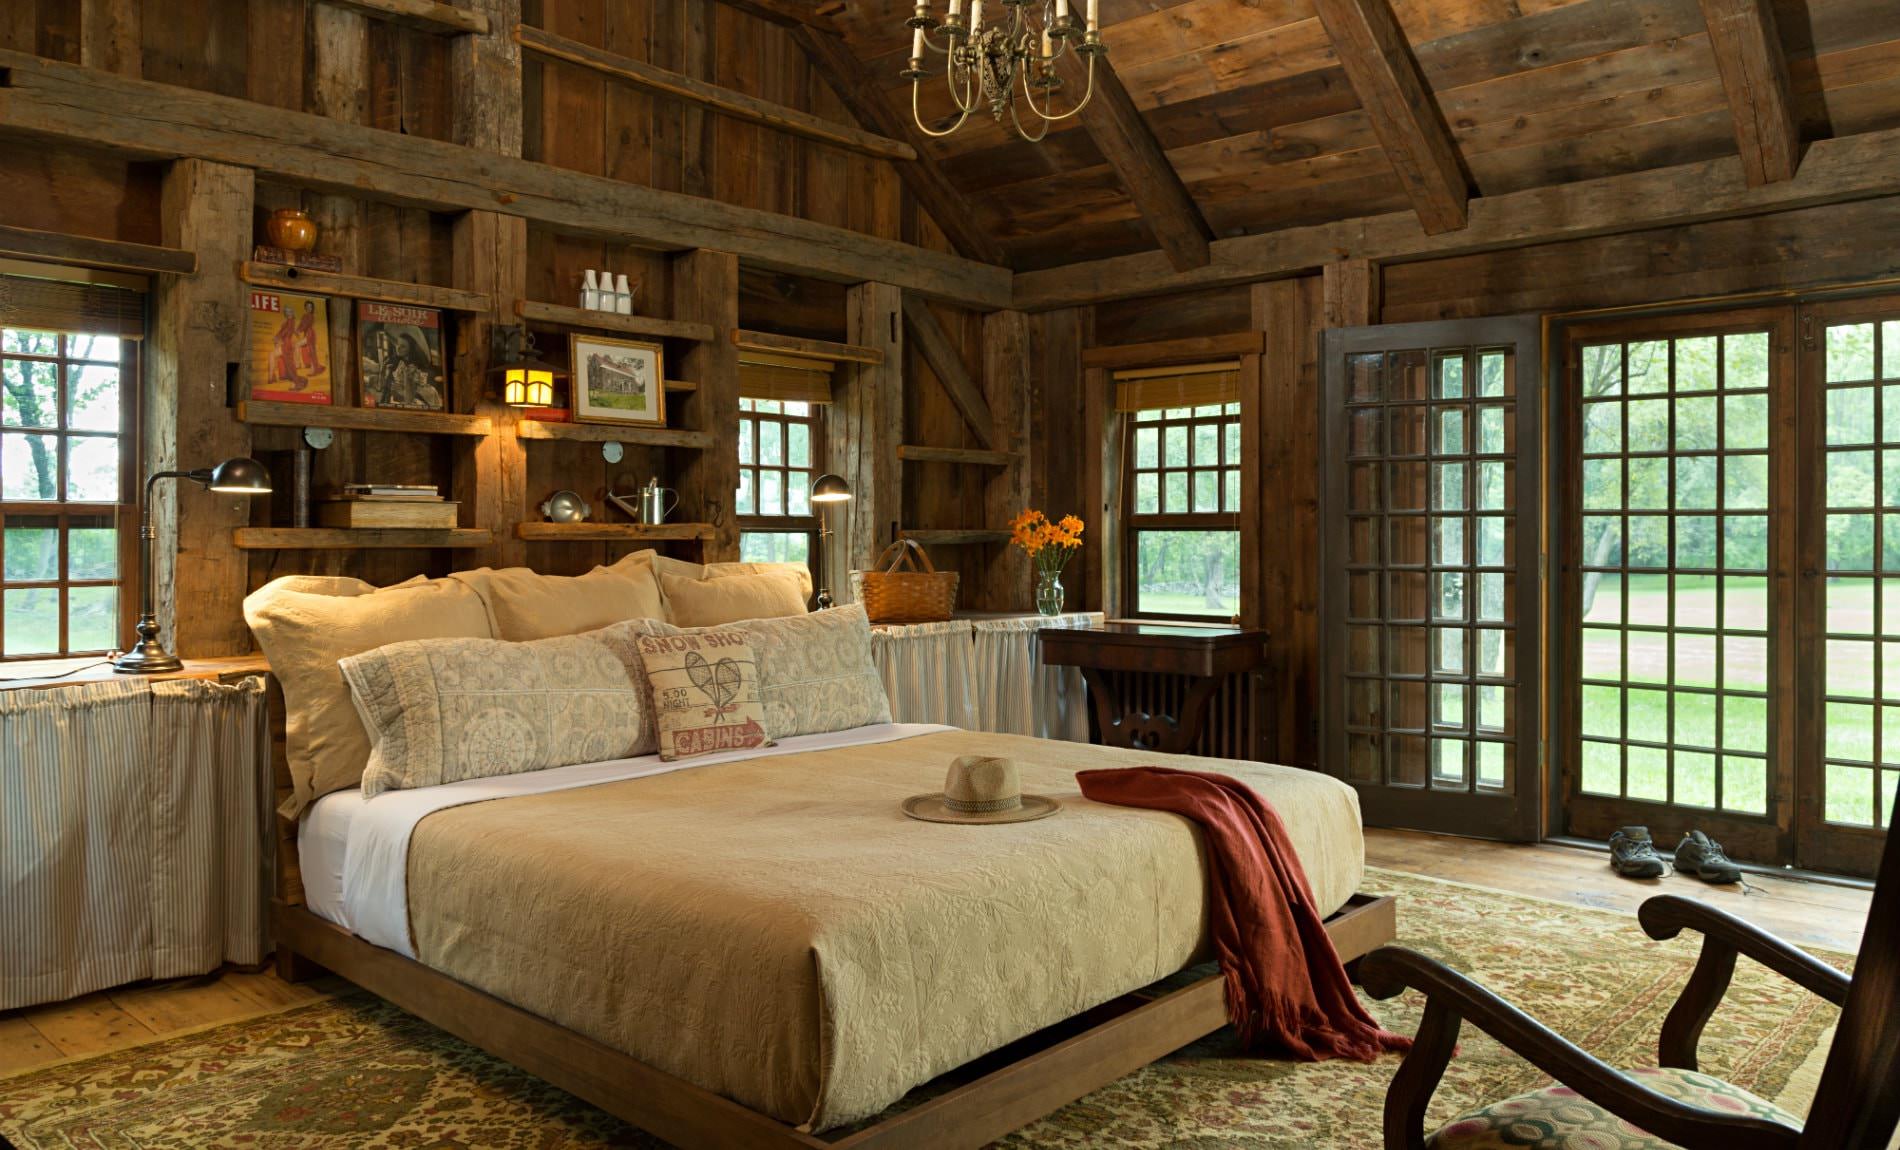 Vaulted rustic wood plank room with exposed beams, double-hung windows and French door, and large bed with tan bedding